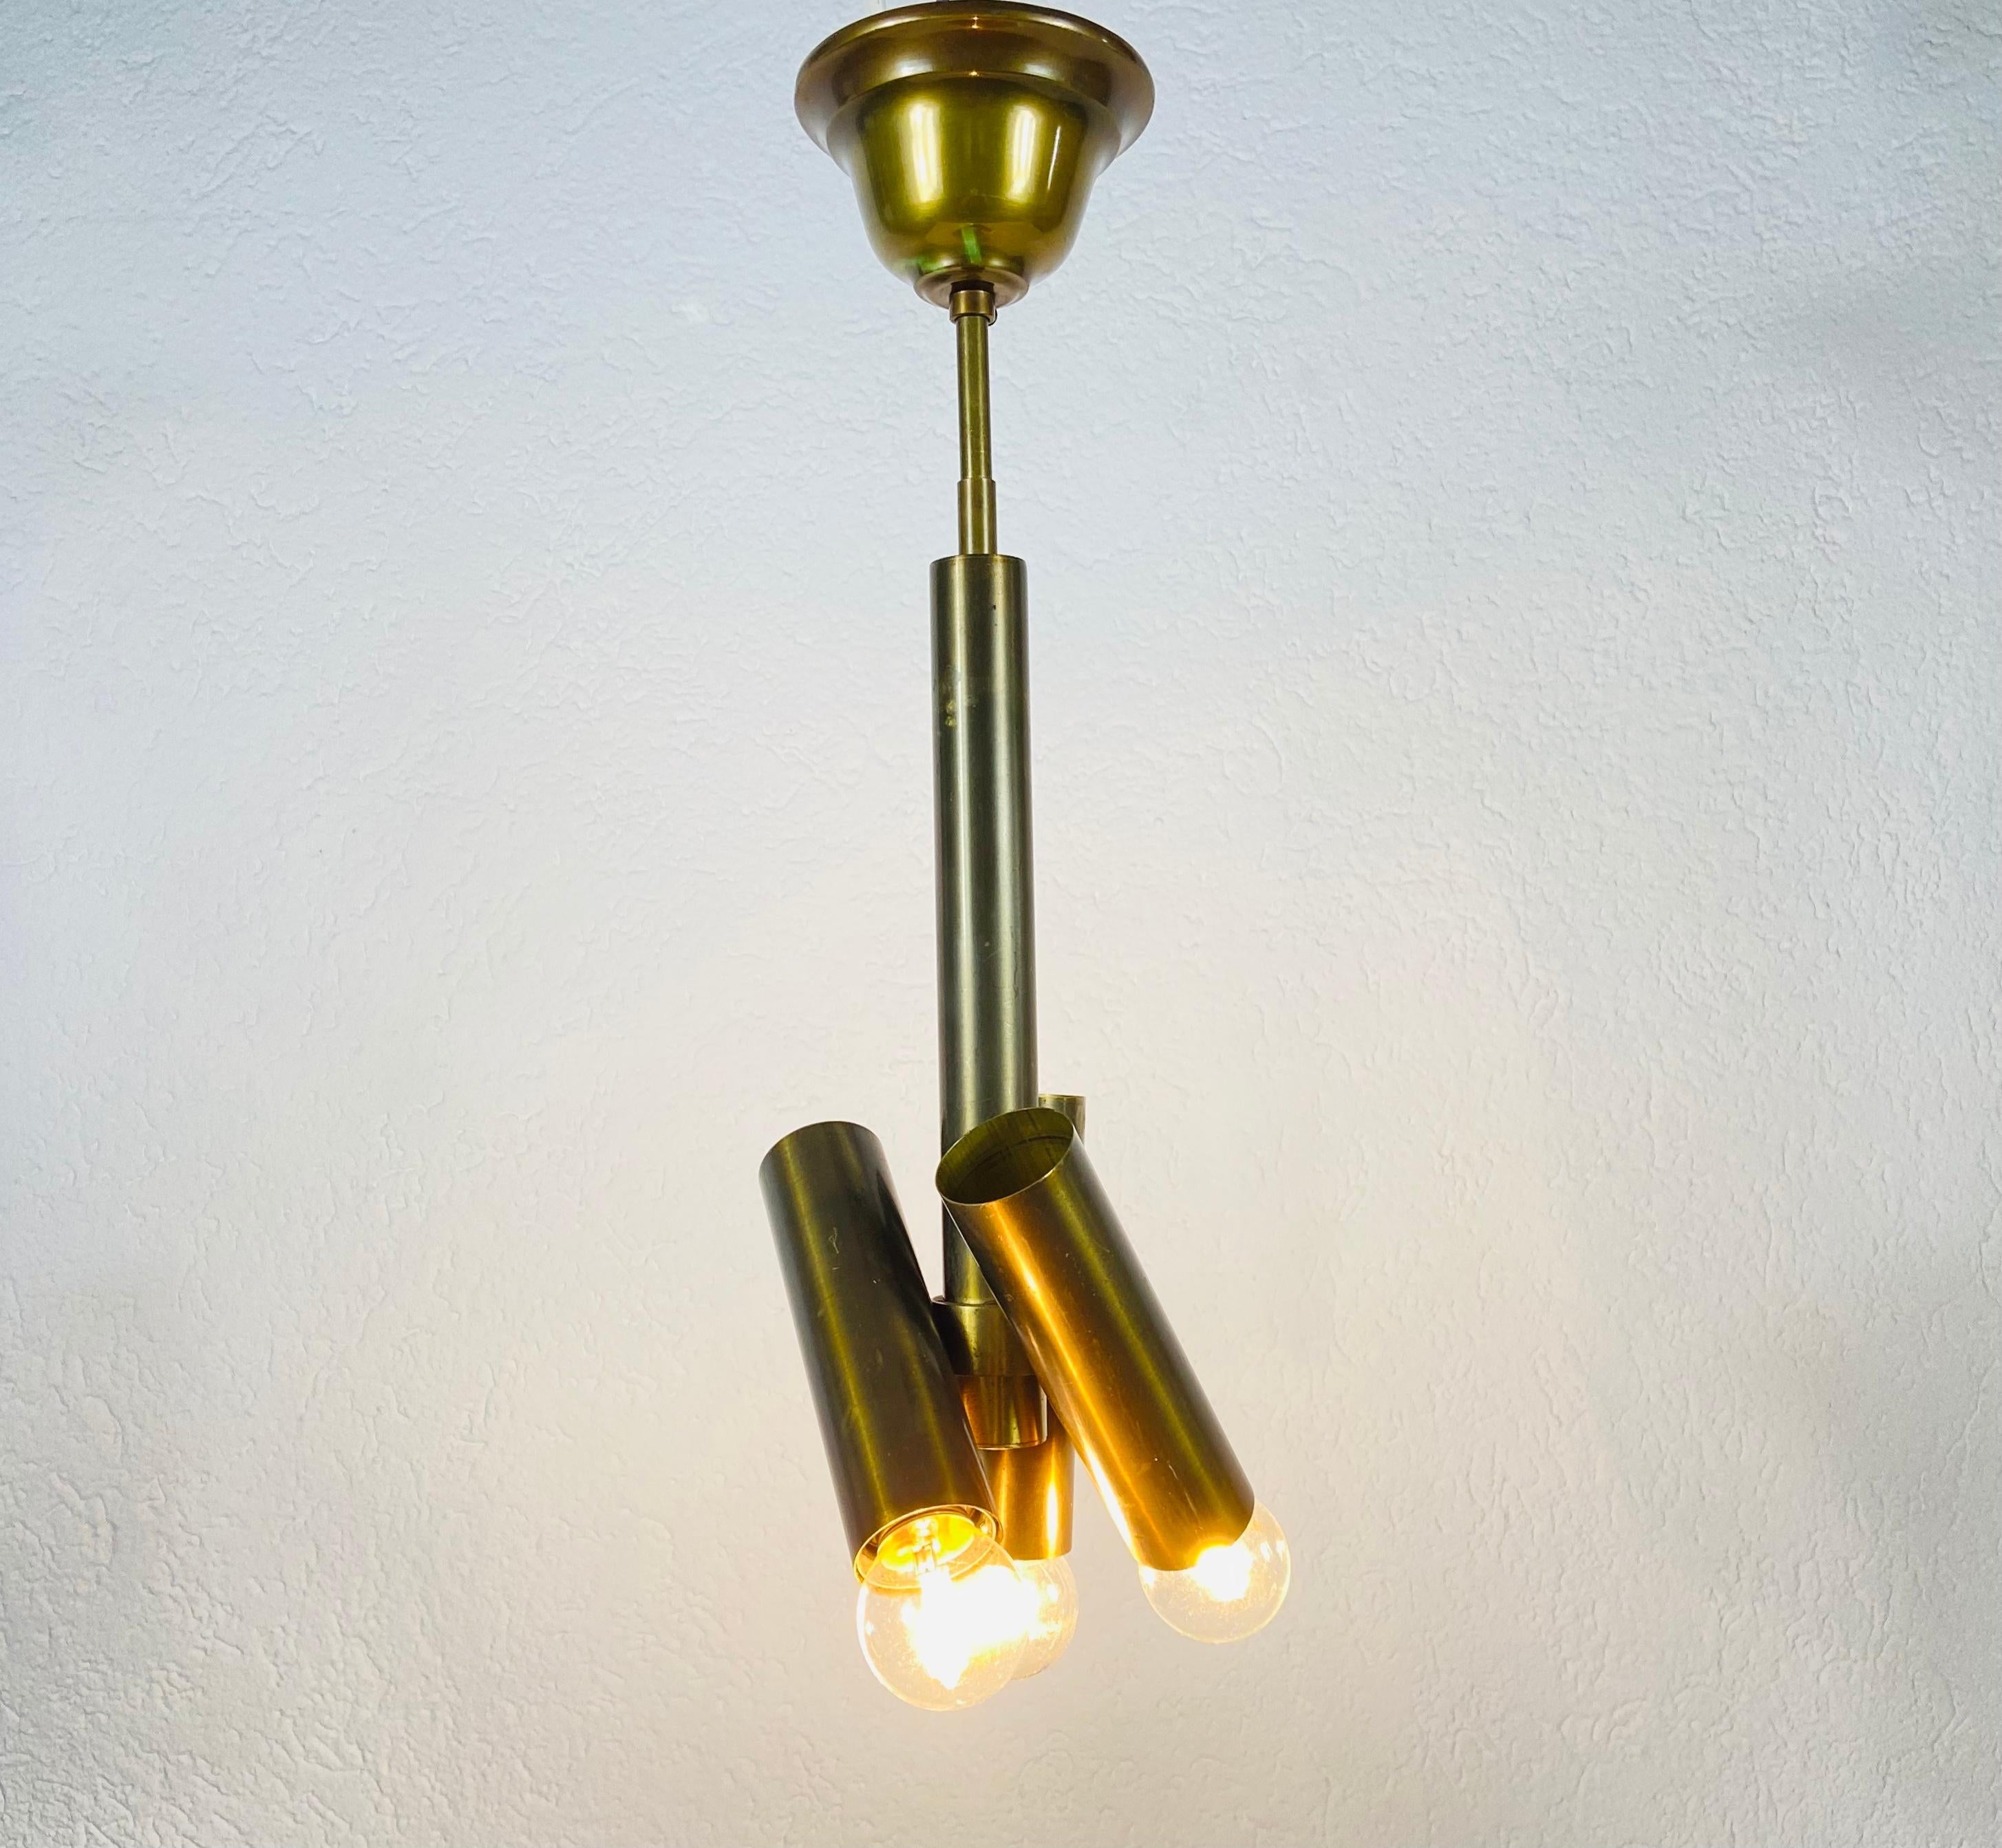 Italian Midcentury Brass 3-Arm Chandelier in the style of Stilnovo, Italy, 1950s For Sale 1